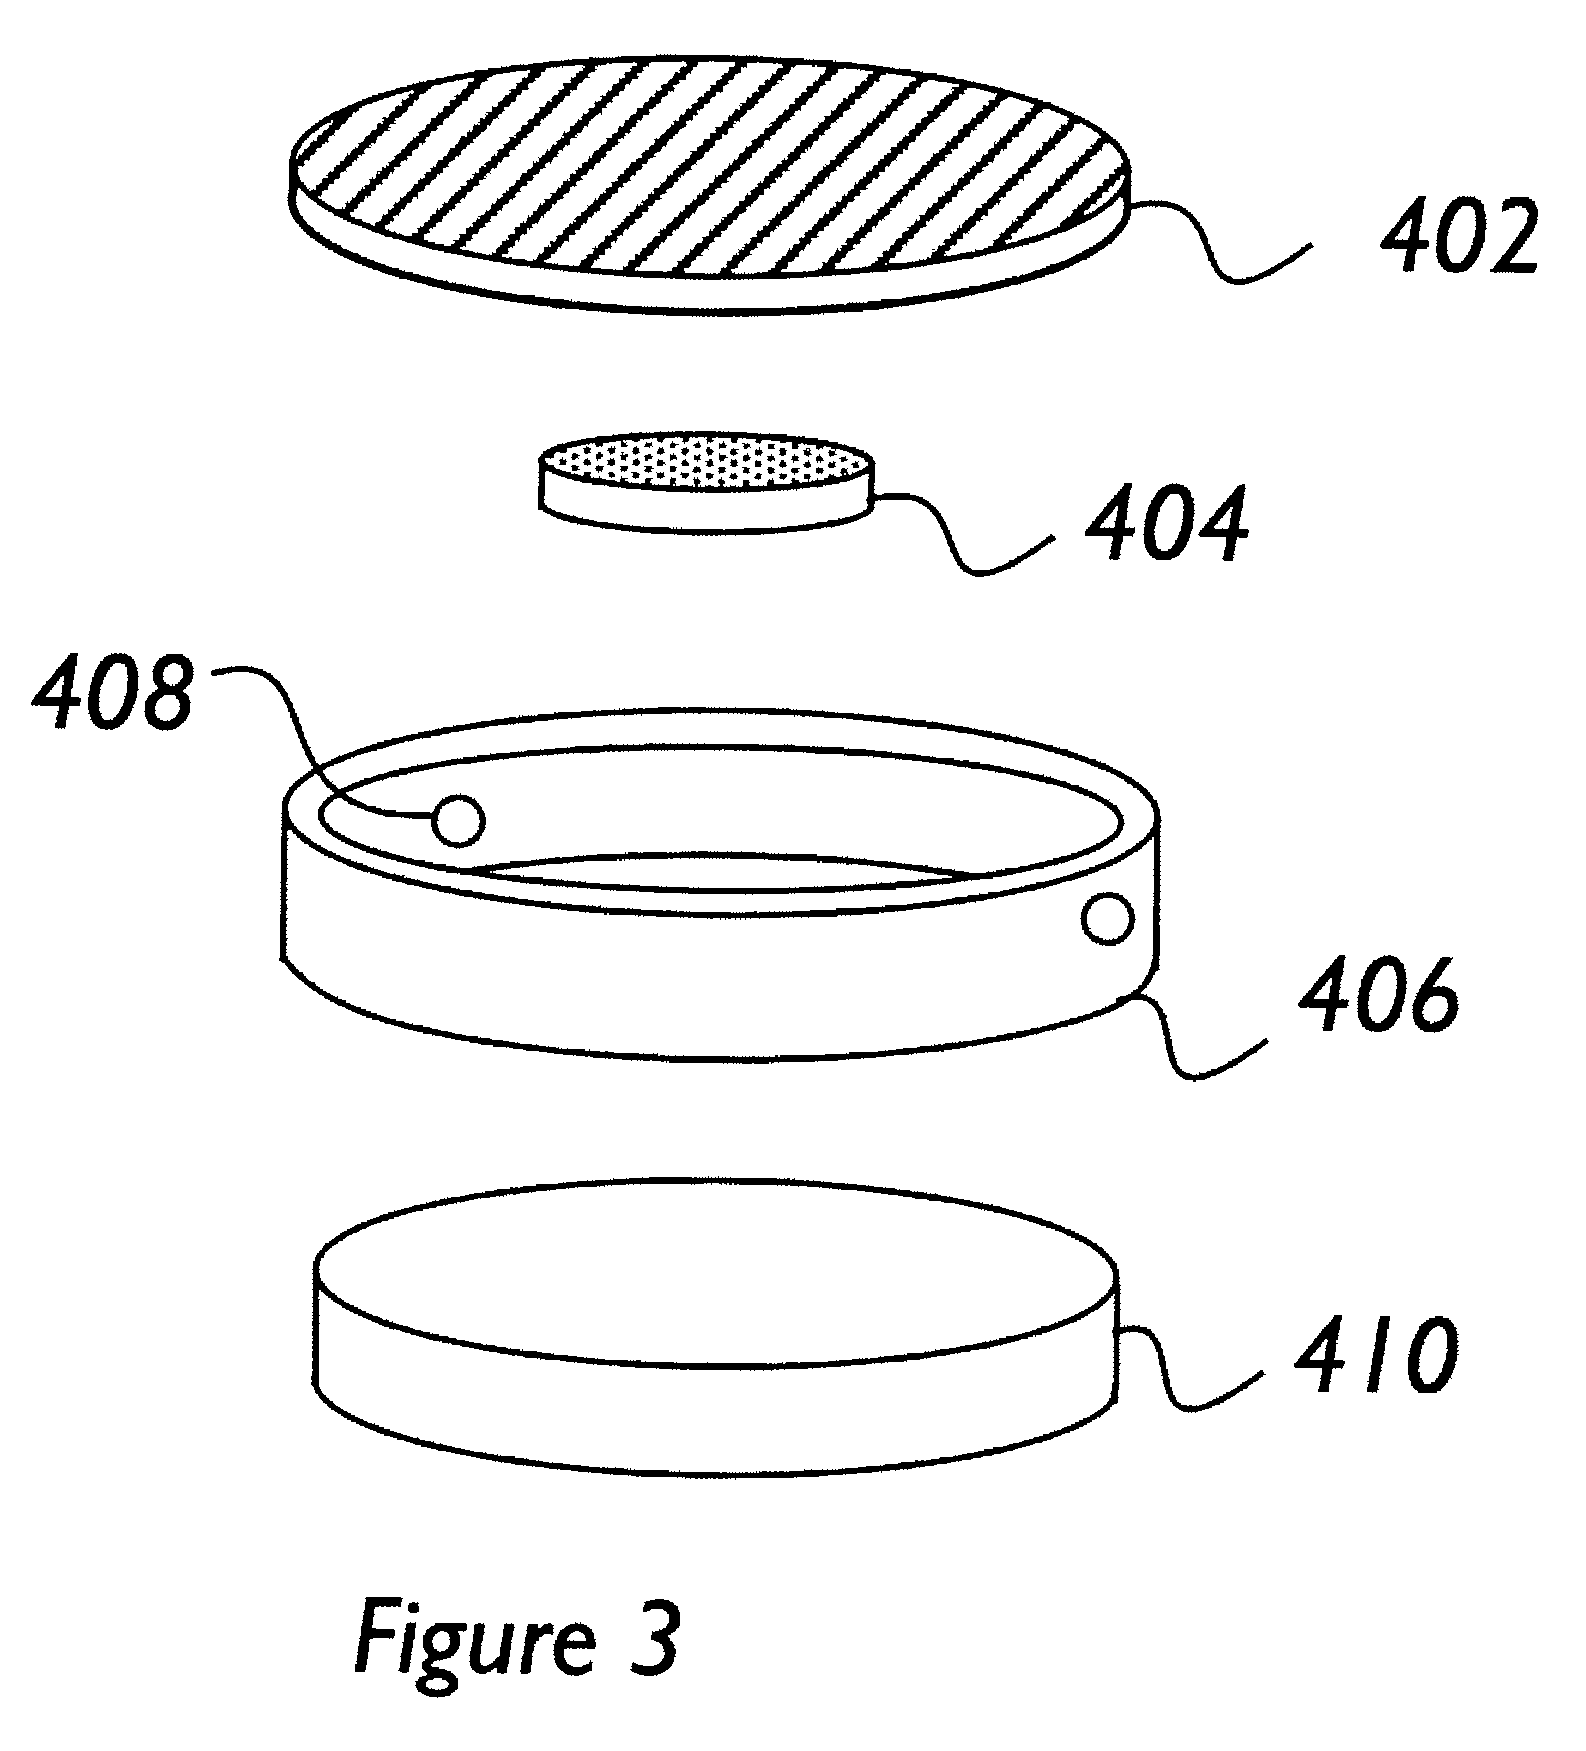 Ring transducers for sonic, ultrasonic hearing